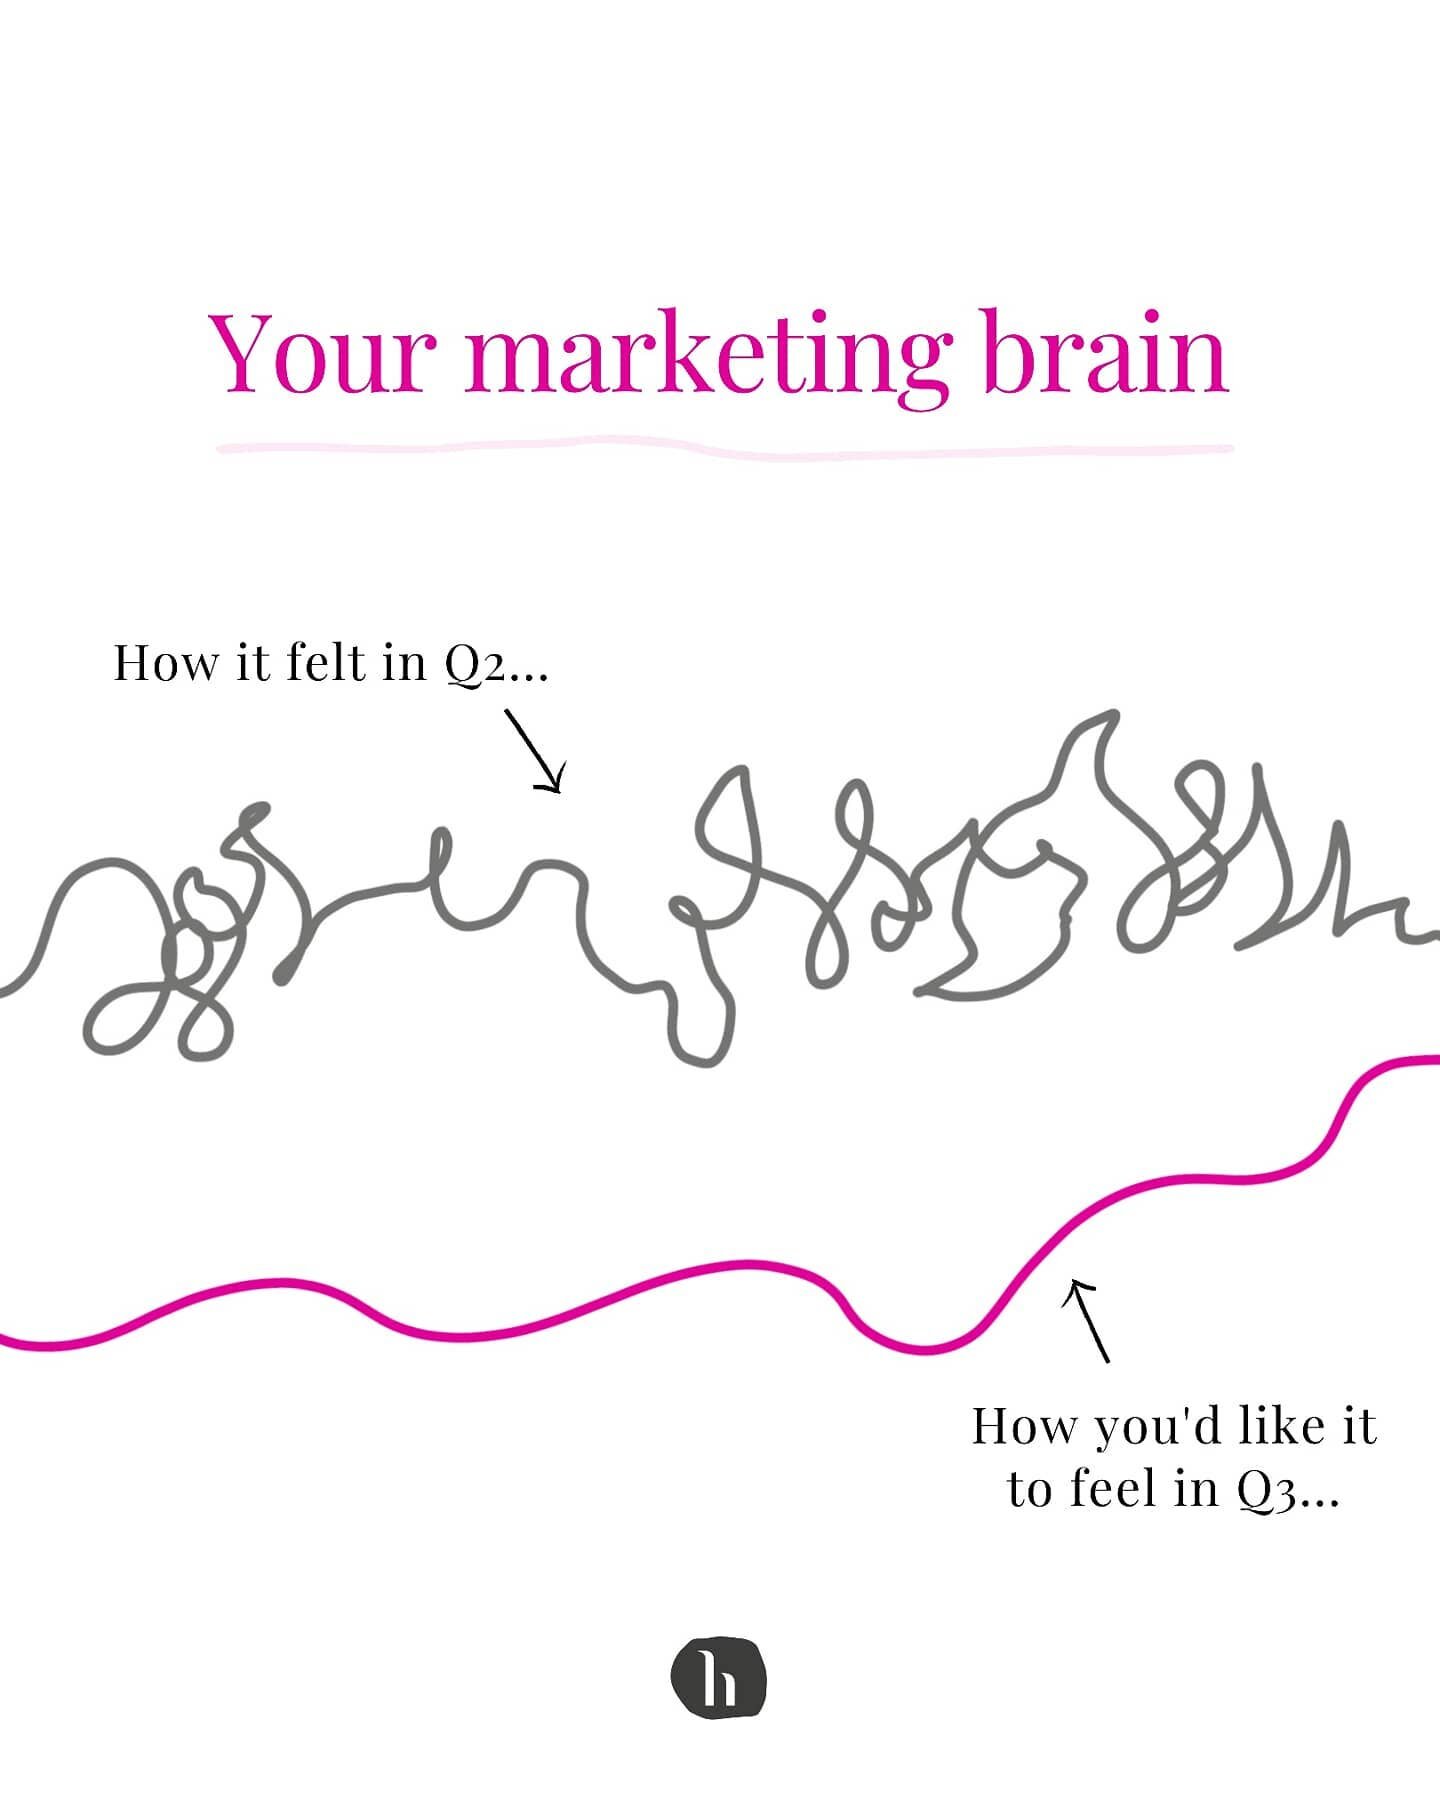 Morning Q3 👋🏼✨ Well, that half of 2021 snuck by quick.

Perfect time to get clear on your marketing goals for the next 3 months and look back on how you've been getting on and what you want to promote this month.

Some things to think about...

👉?